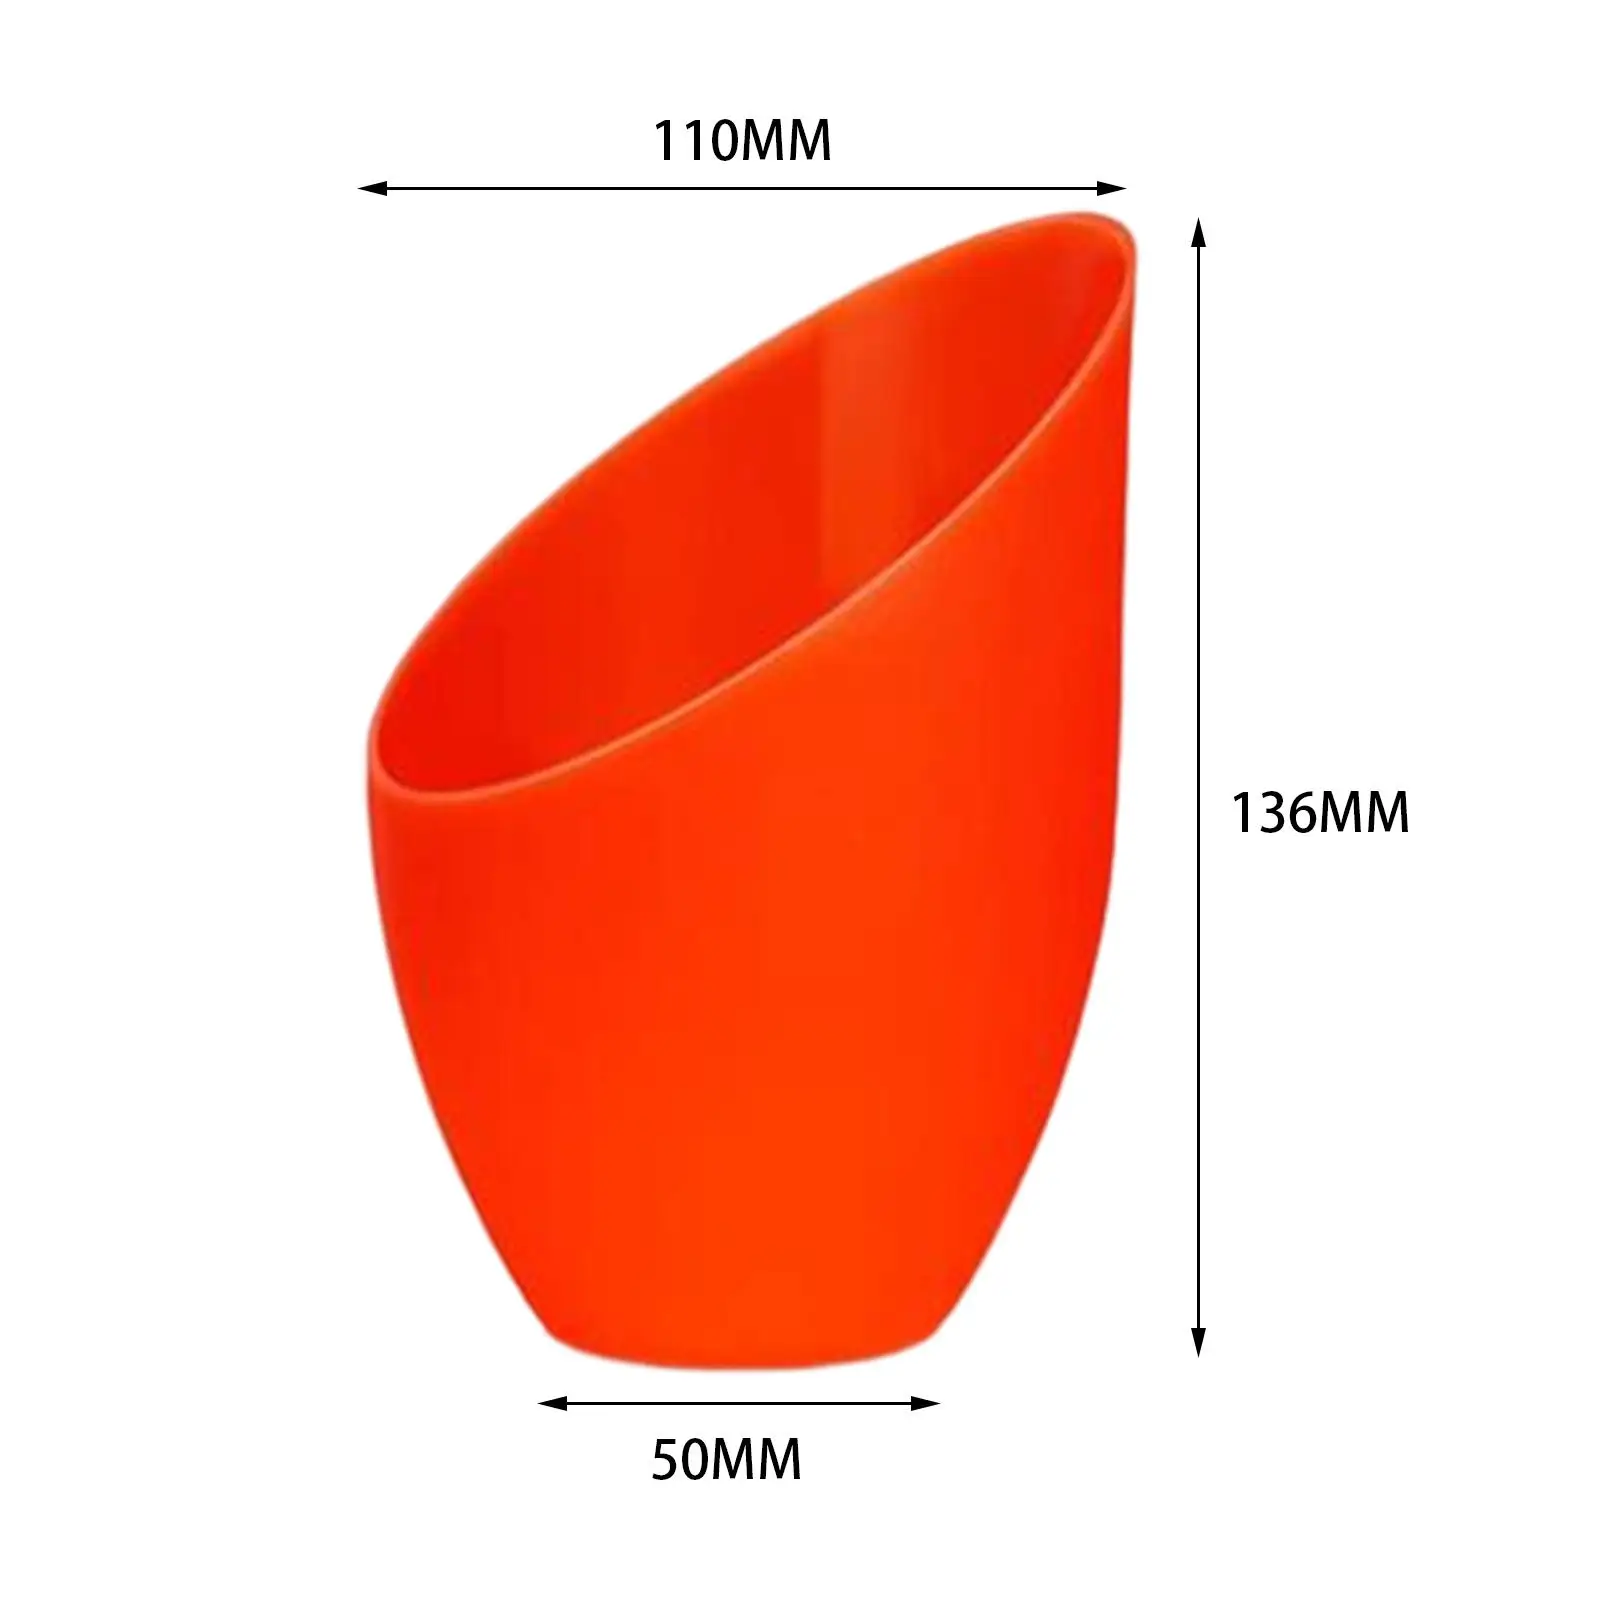 

5 Pieces Plastic Lampshade 5.35 inch High, 4.33 inch Diameter, 1.65 inch Fitter for Ceiling Fan Light